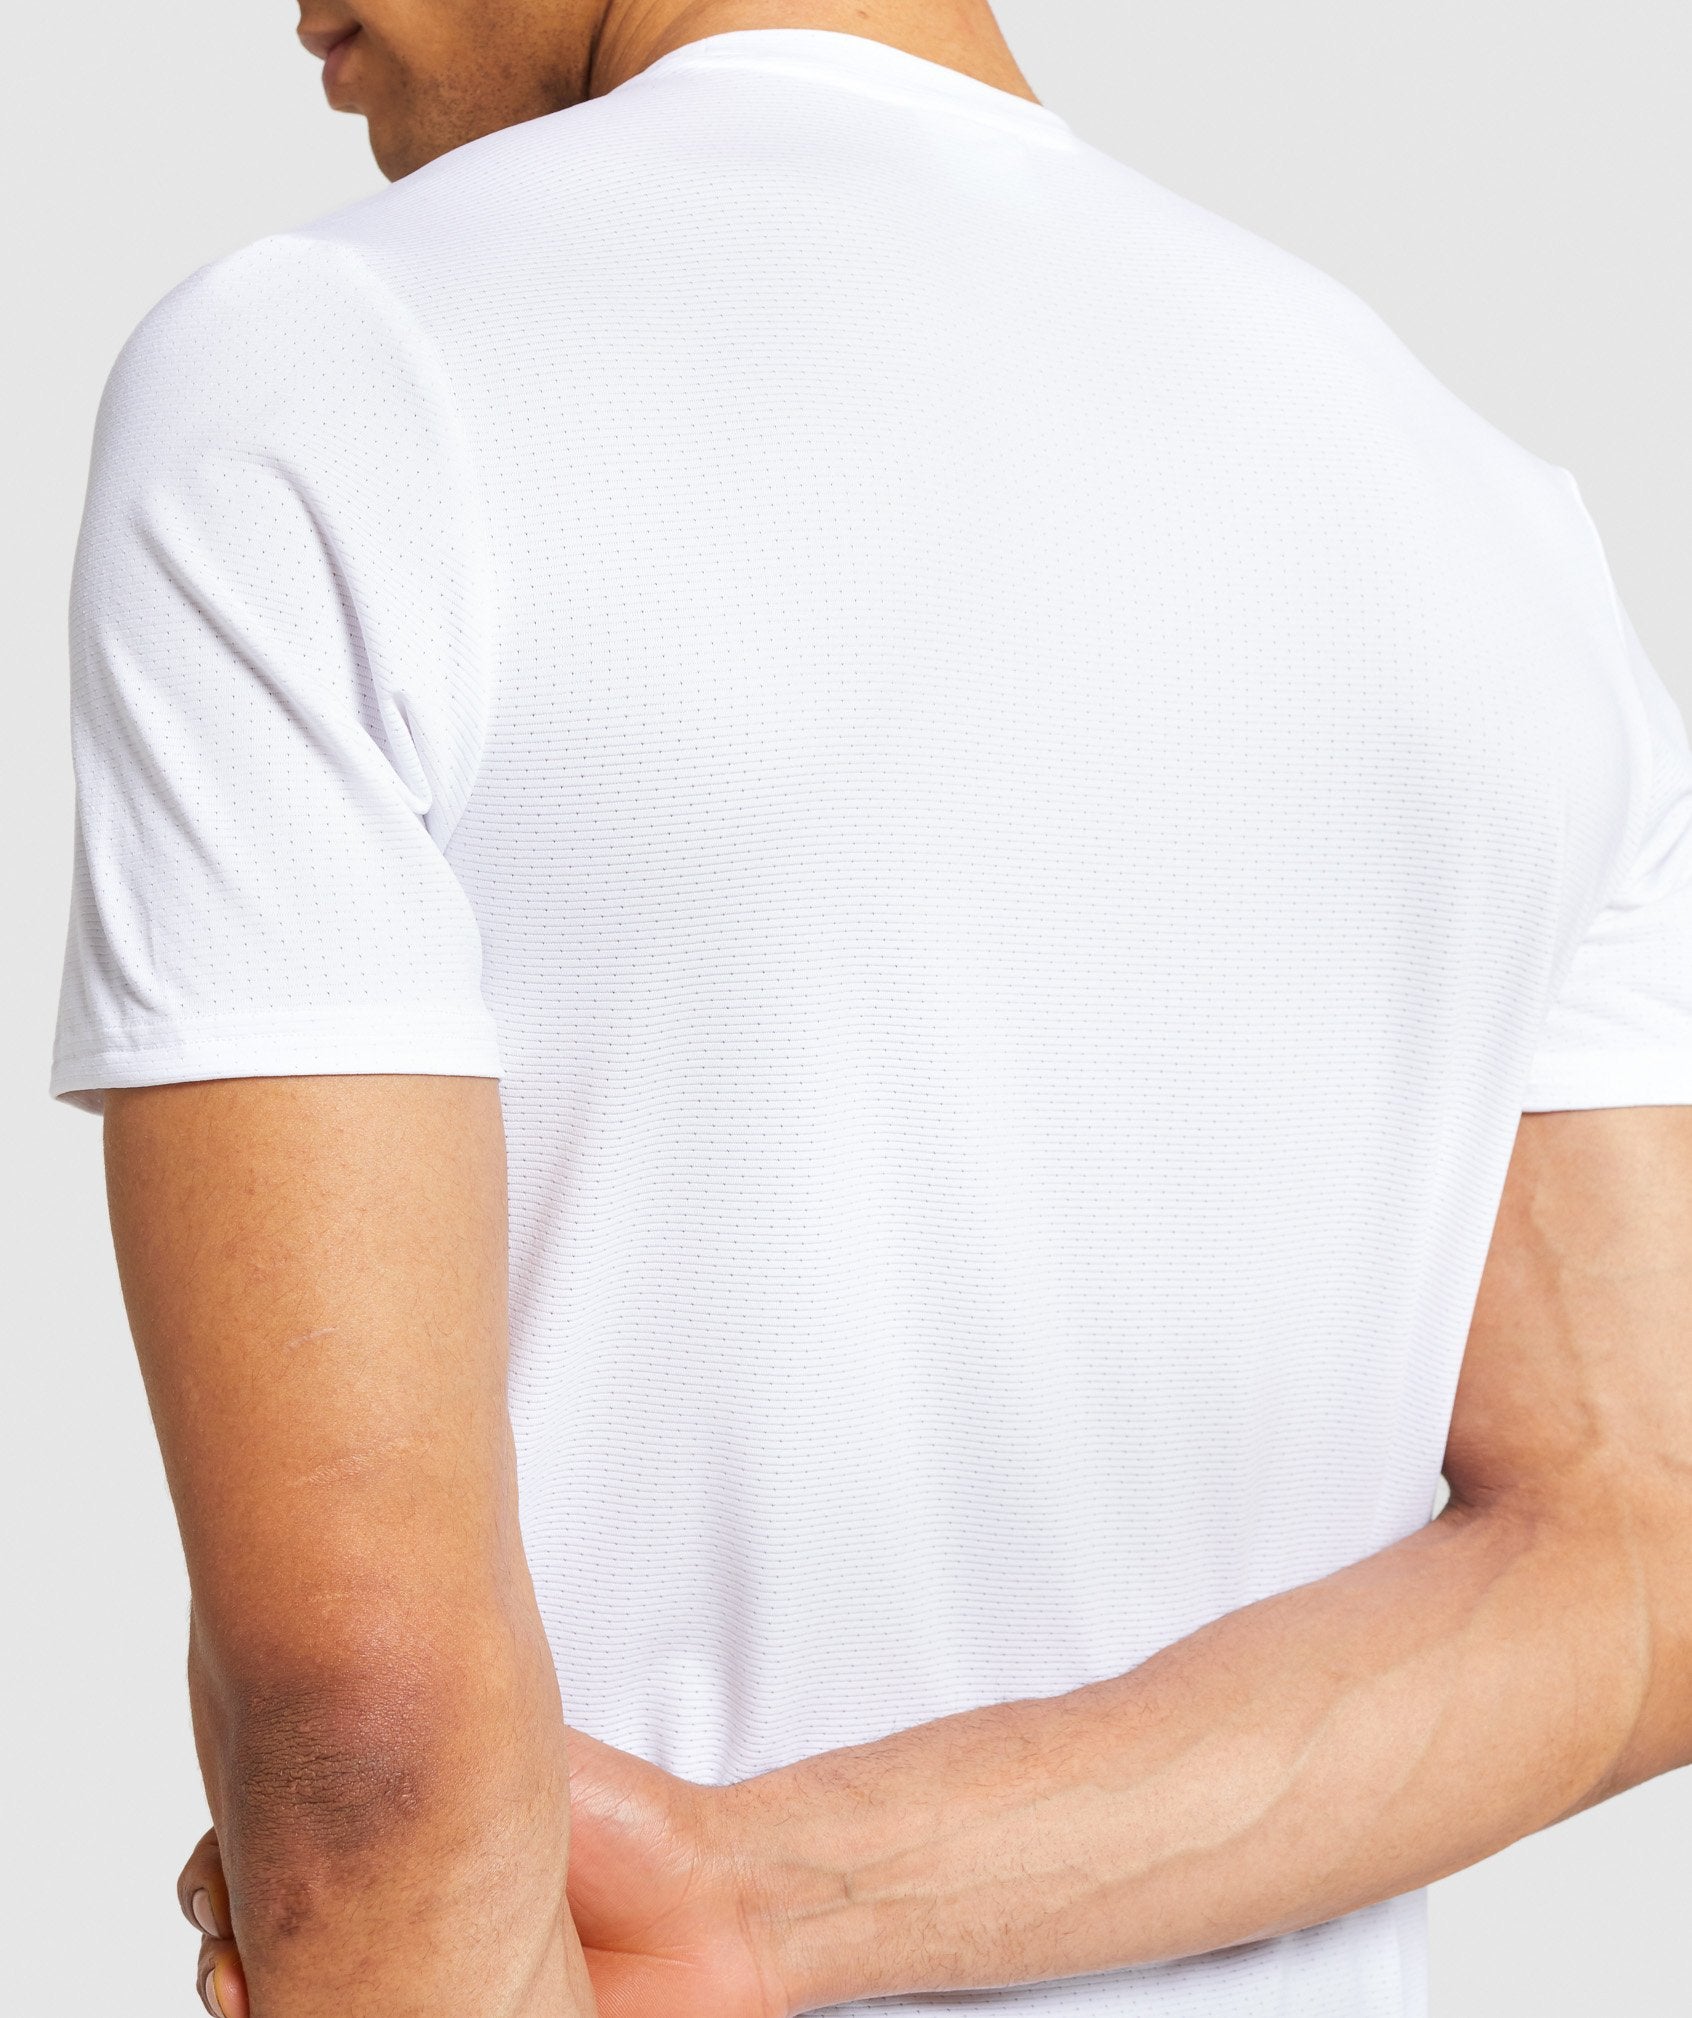 Arrival T-Shirt in White - view 7